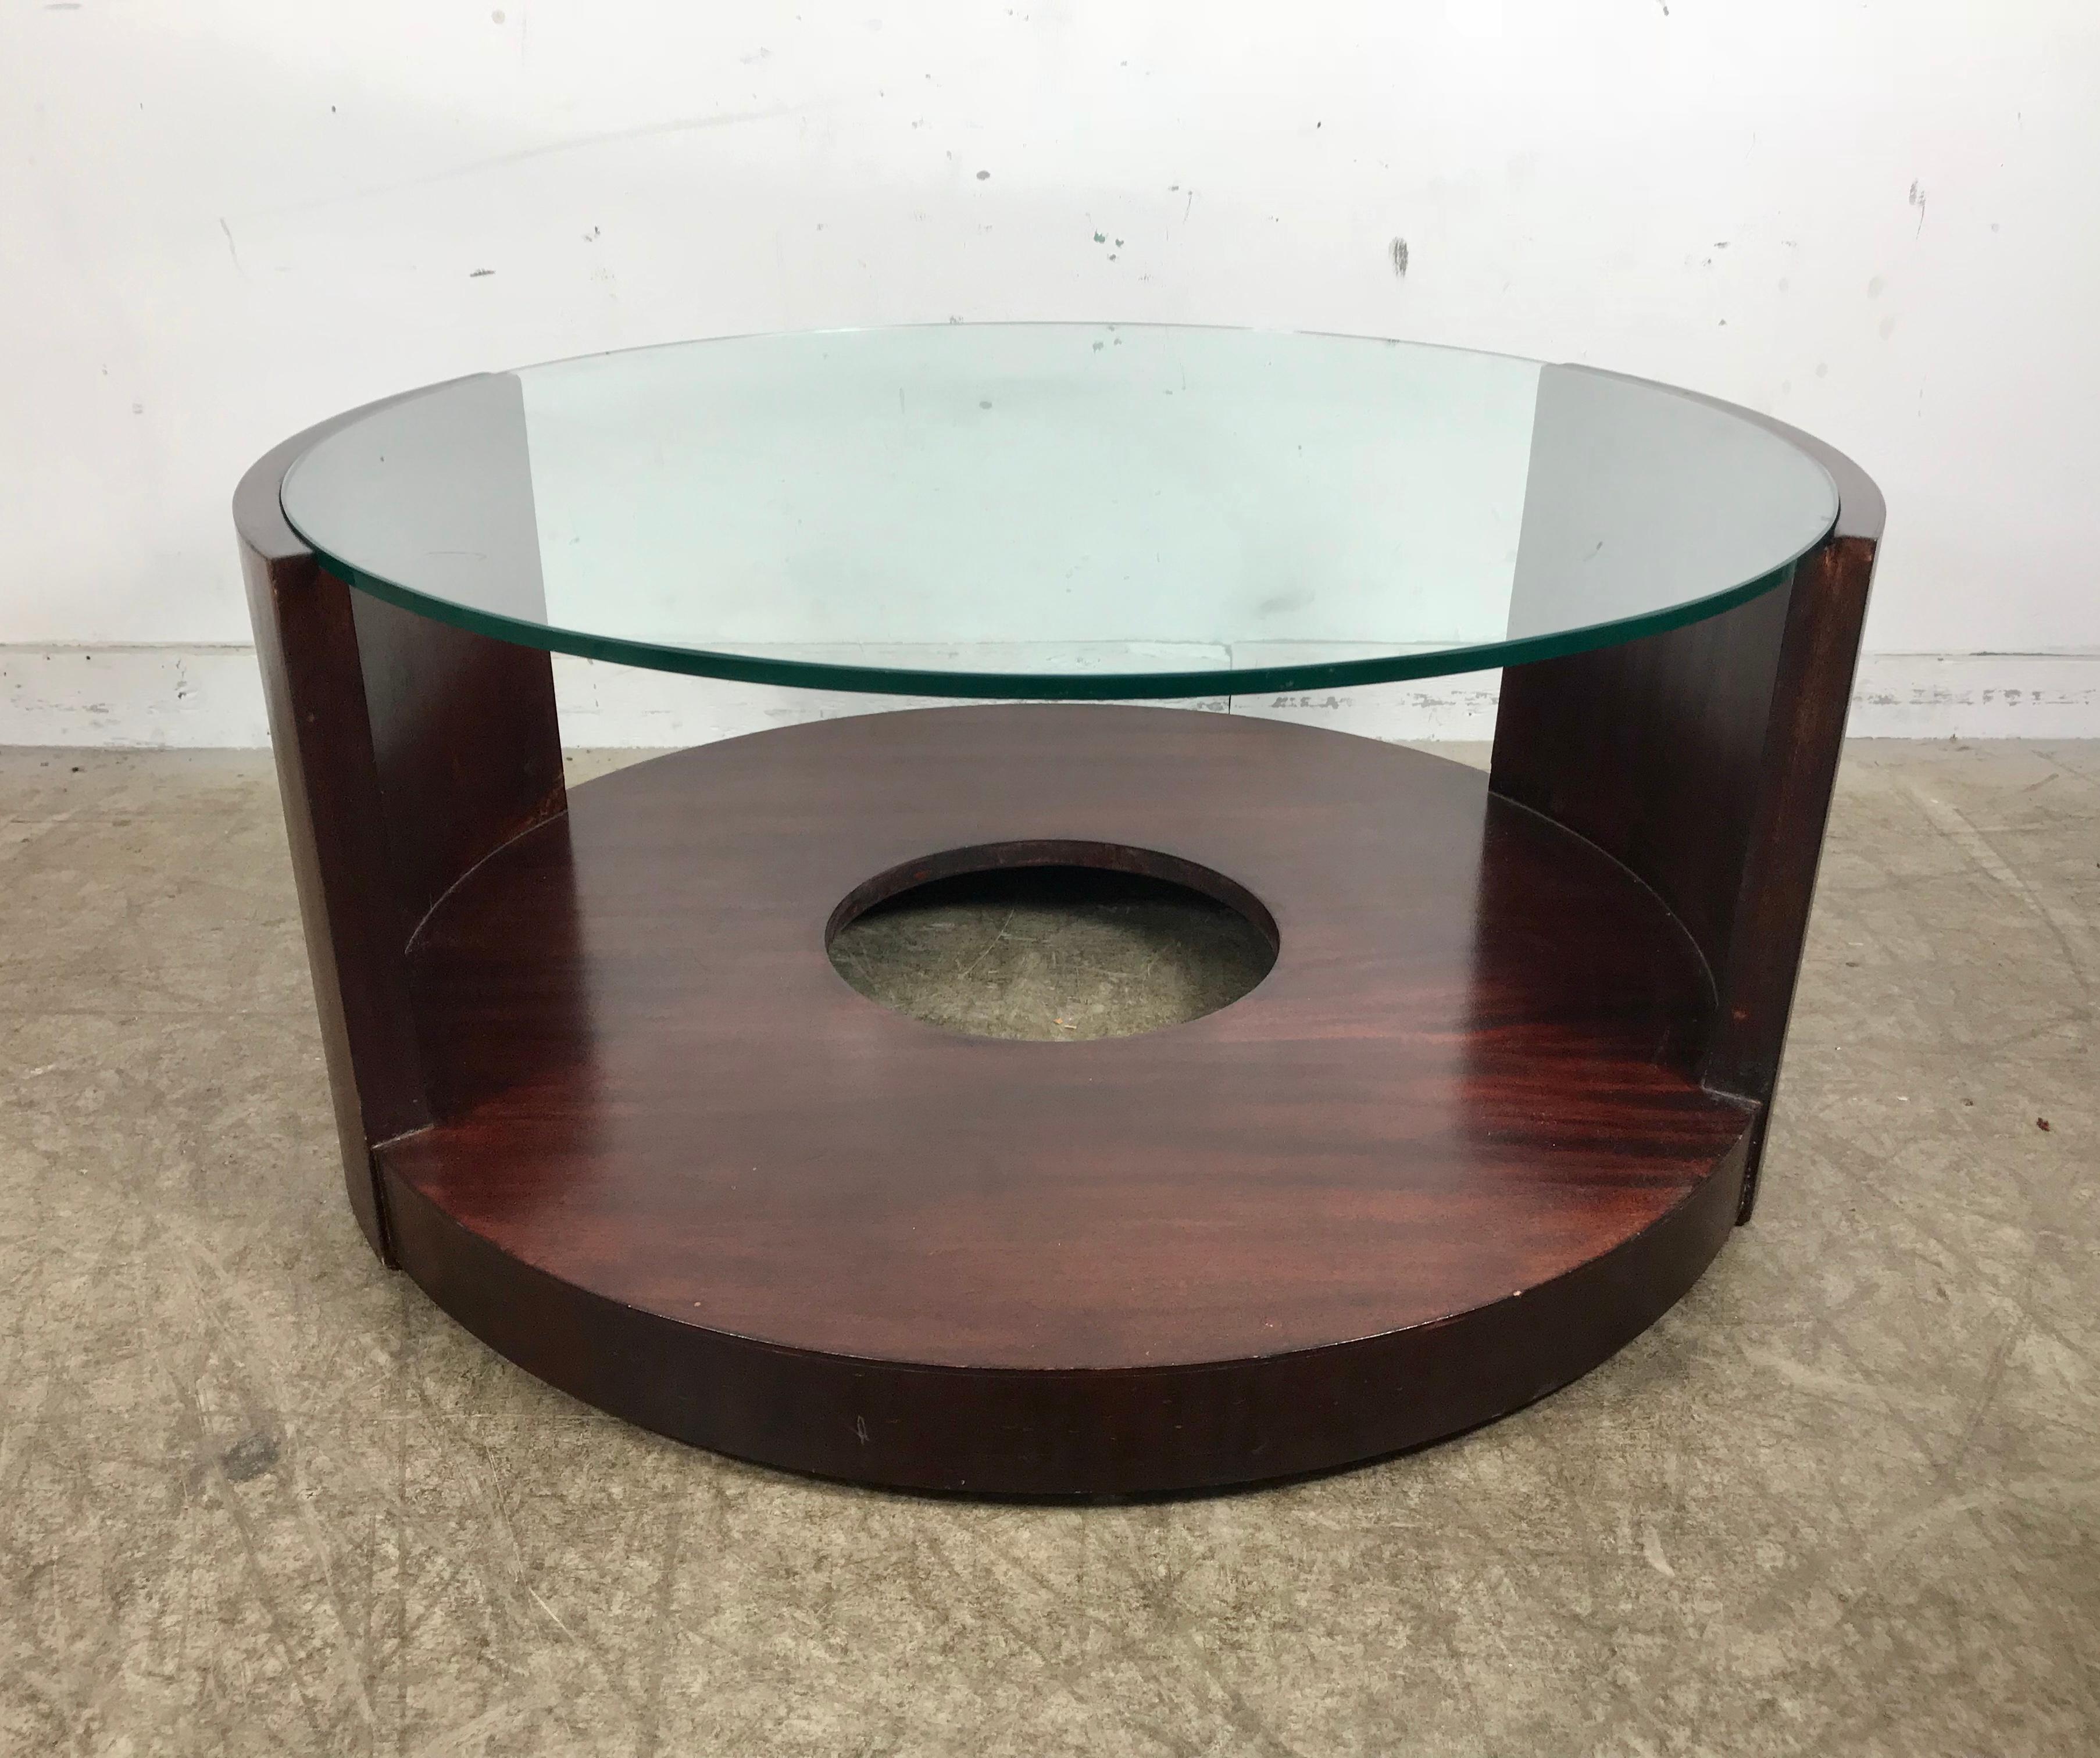 Stunning, modernist mahogany and glass round cocktail table designed by Gilbert Rhode, circa 1939. Amazing Minimalist design, important transitional period from Art Deco to modern, possibly introduced at the 1939 Worlds Fair. Hand delivery avail to